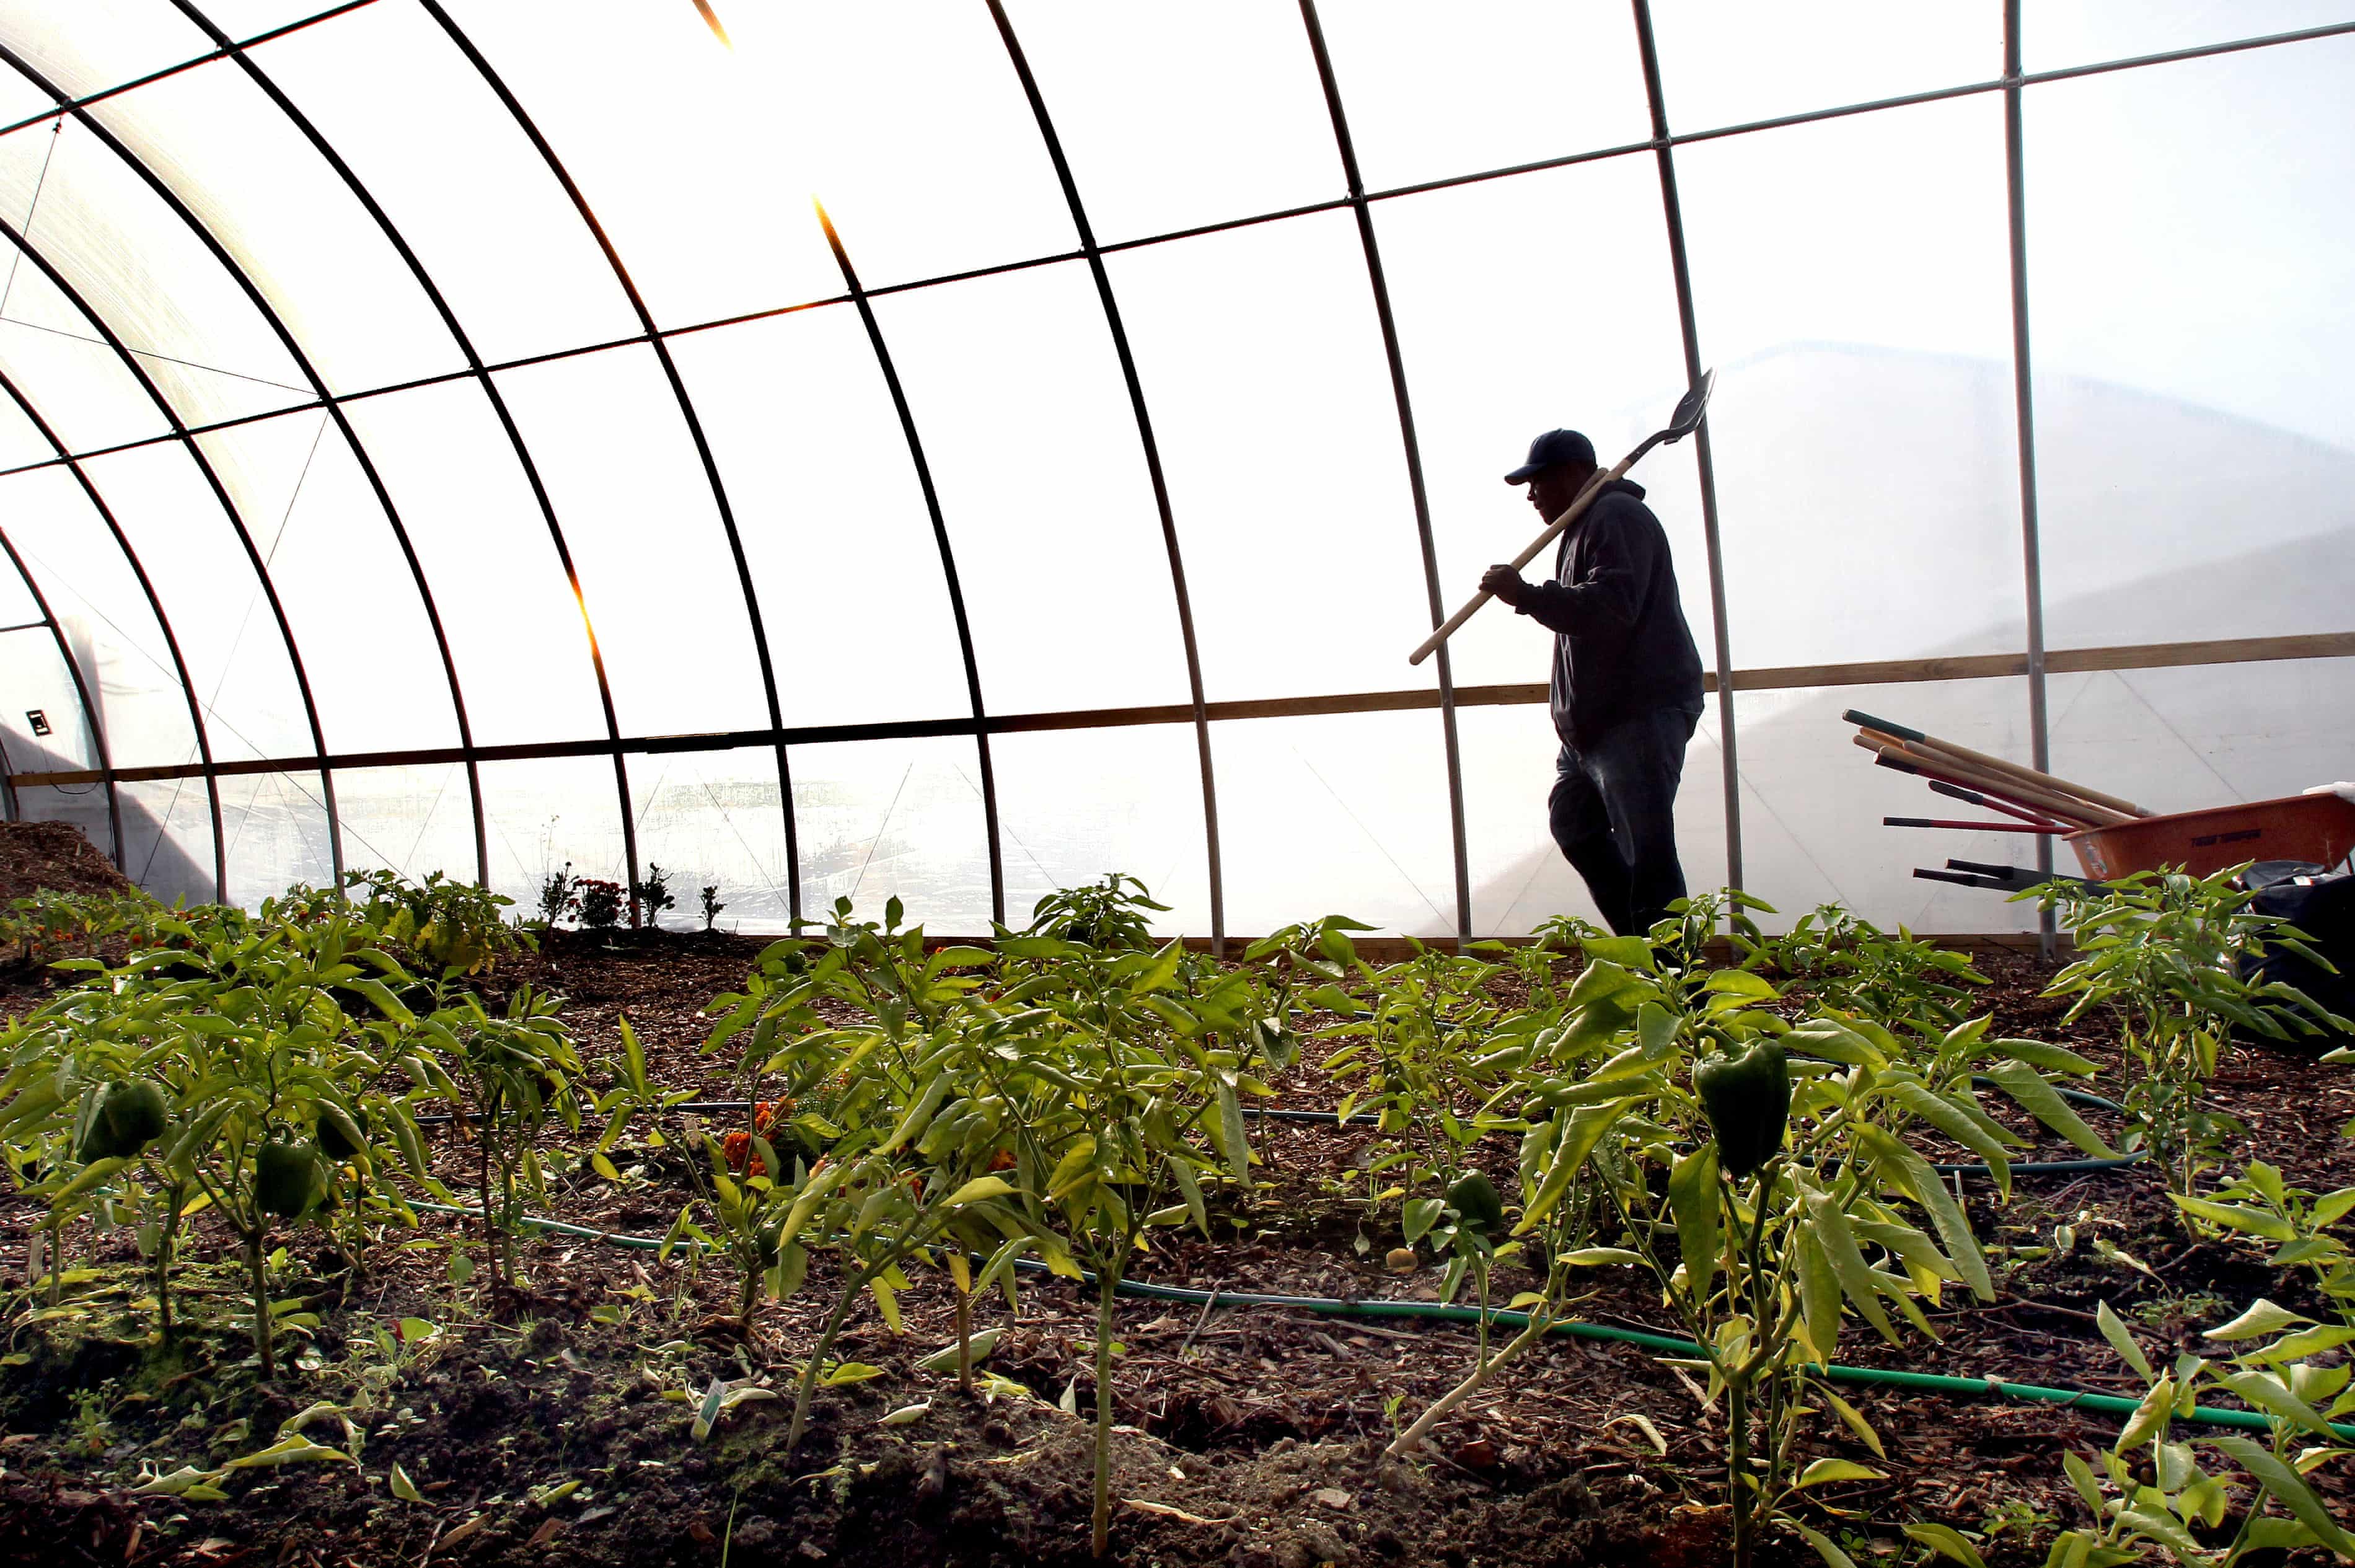 Meet the activists bringing urban farms to one of America’s most deprived cities | The Guardian